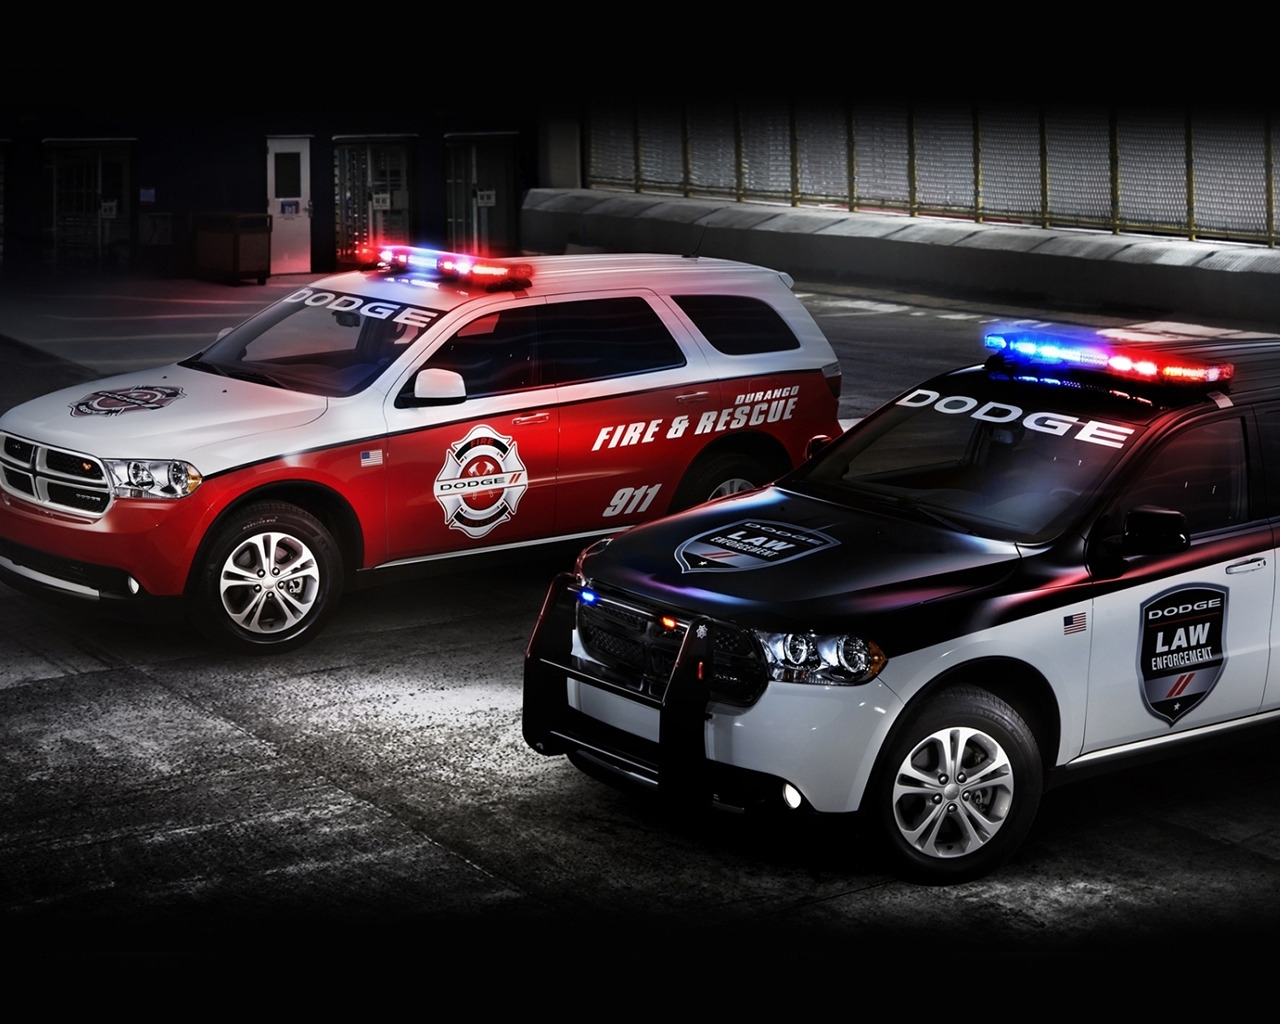 Dodge Police and Fire Cars for 1280 x 1024 resolution